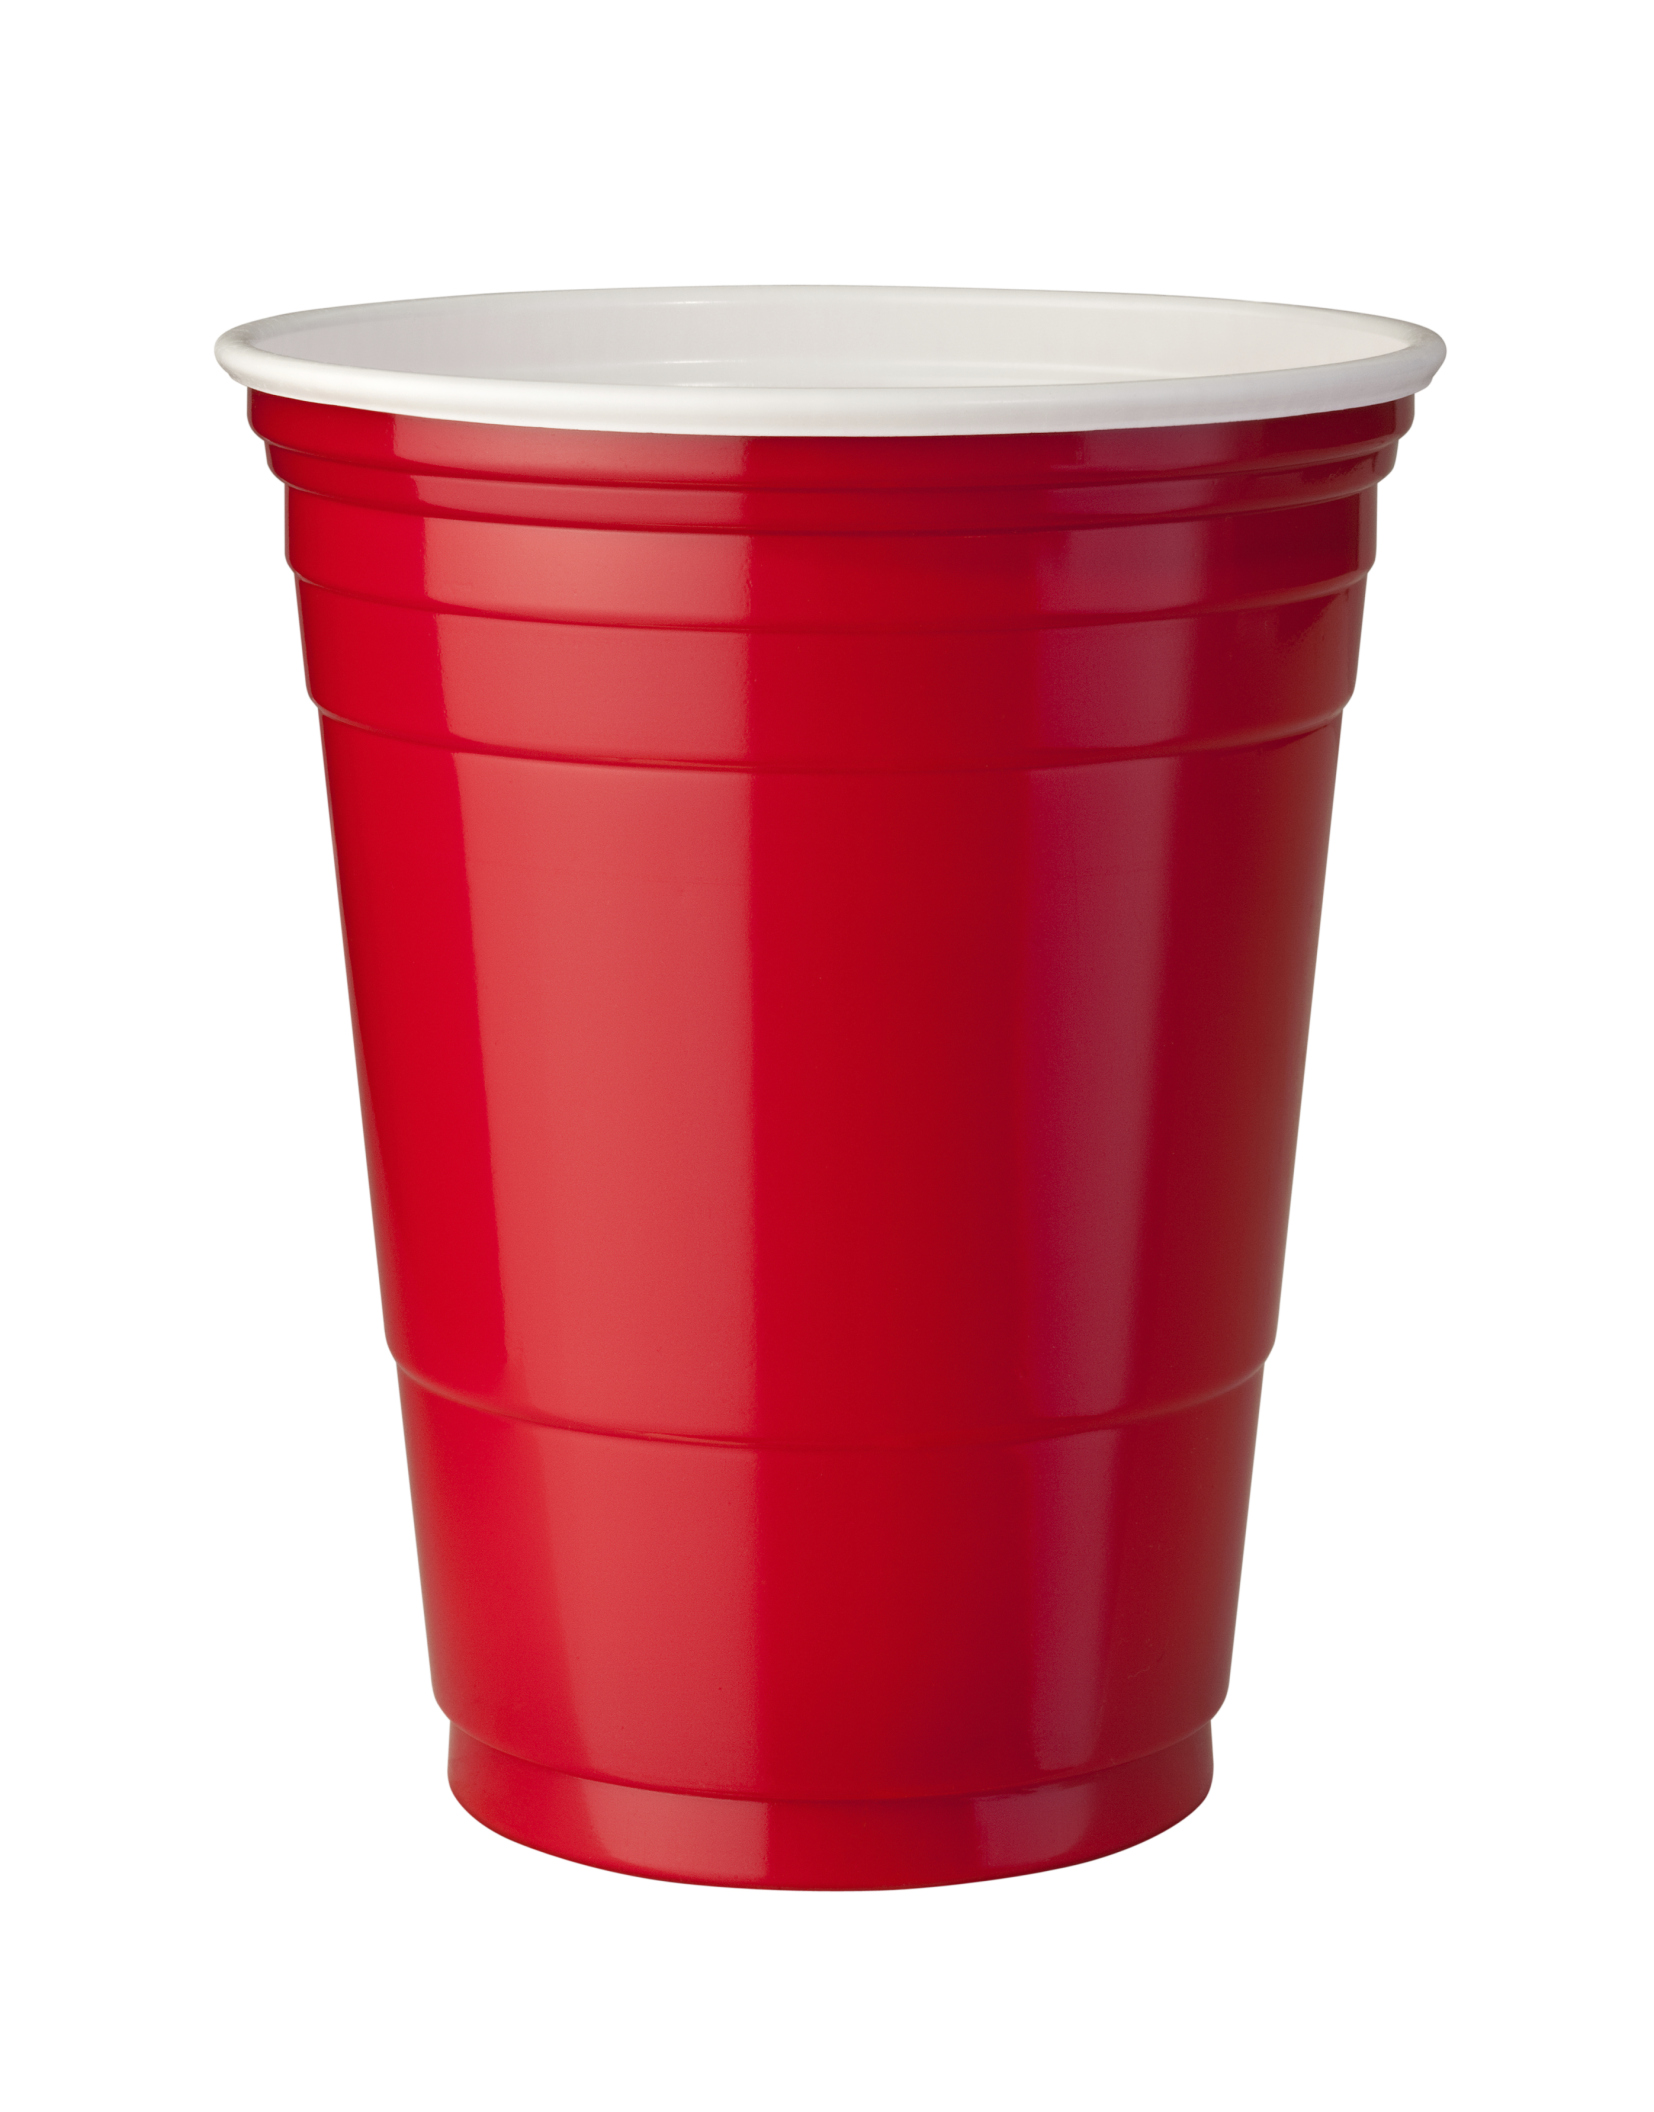 Red Plastic Cup Clipart   Clipart Panda   Free Clipart Images